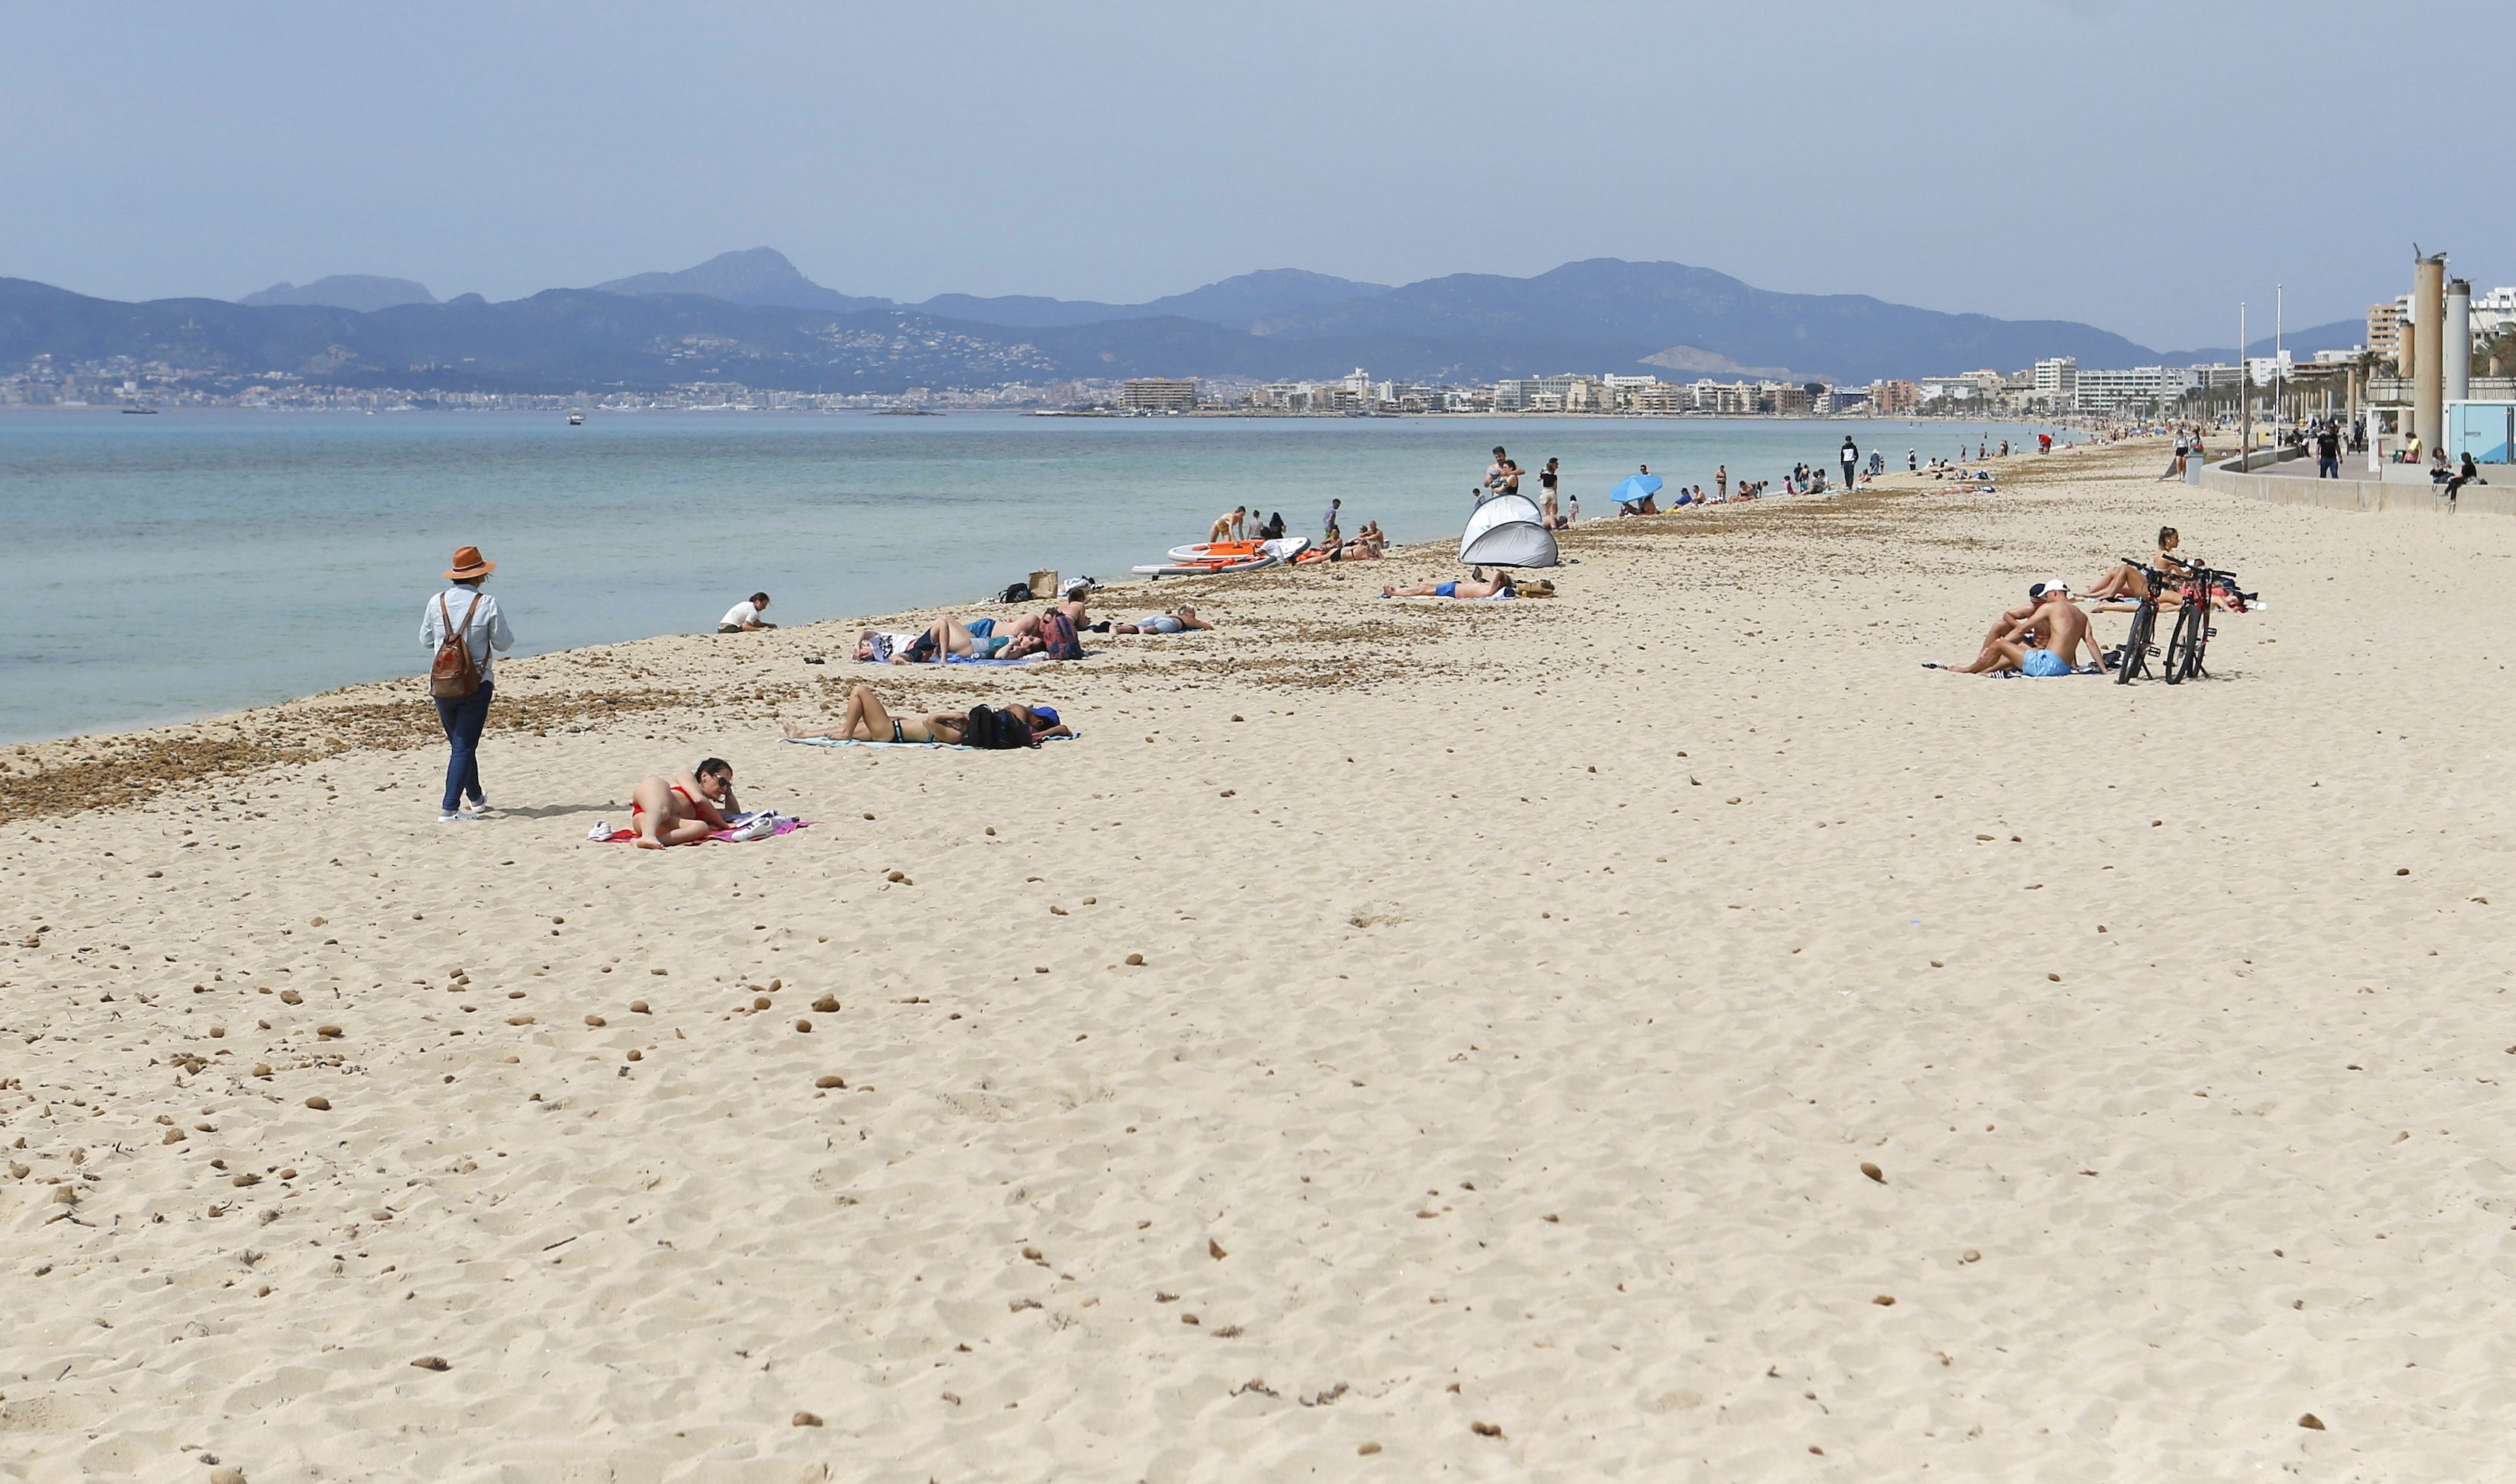 Spain sees foreign tourist numbers rebounding to 45 million in 2021